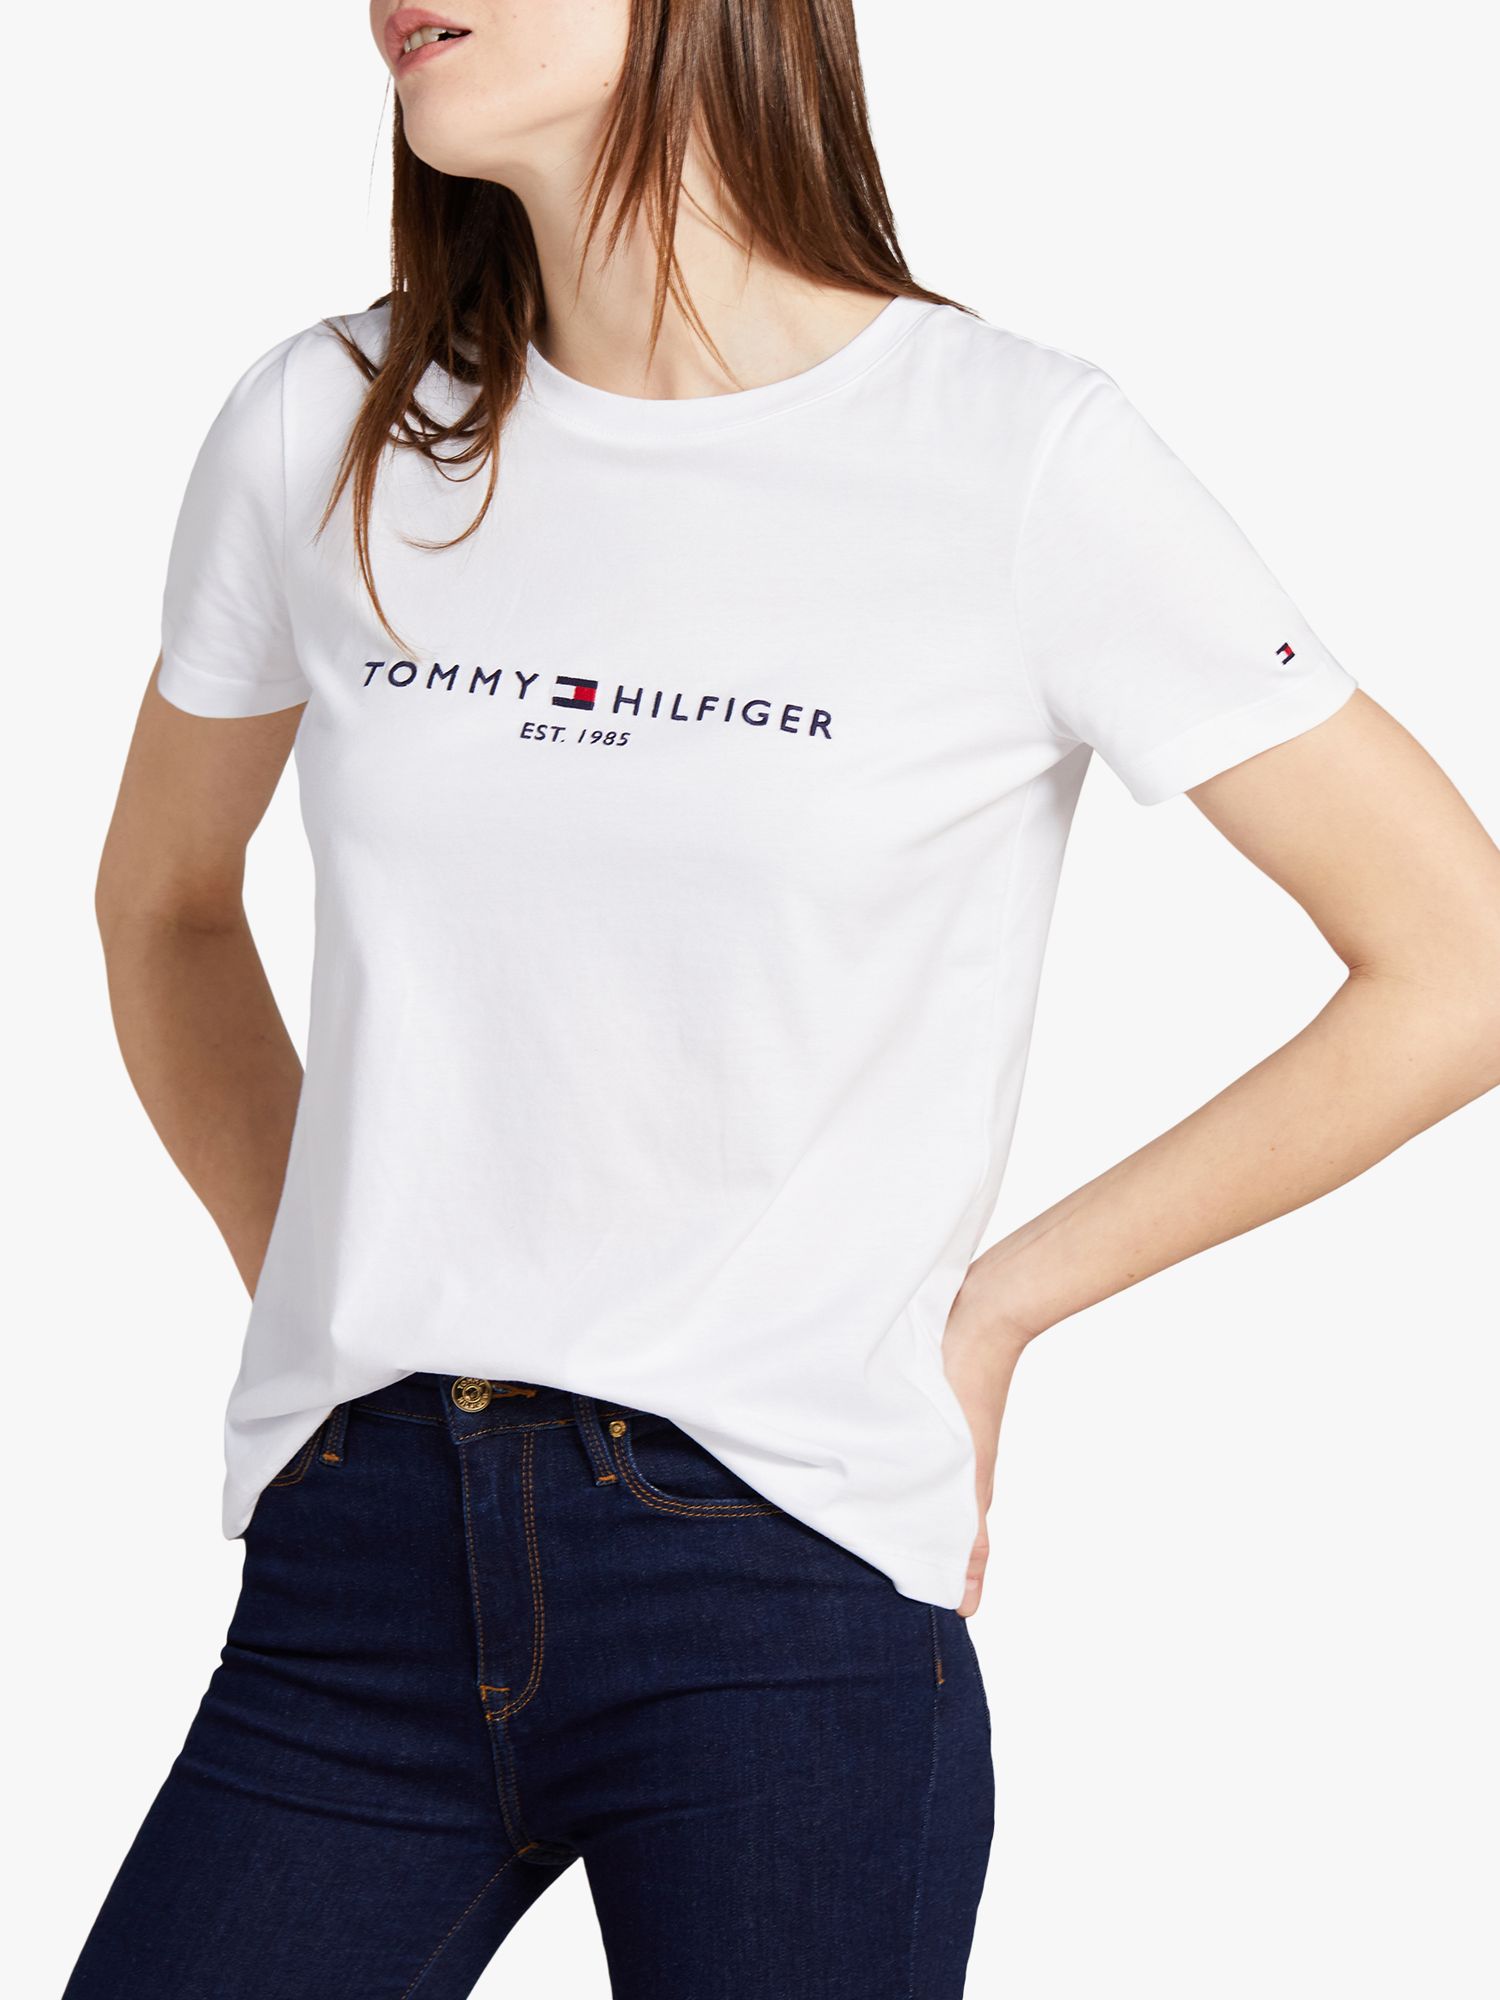 Tommy Hilfiger Womens T-shirt Big Logo Relaxed Fit Short Sleeve Crew Neck  New/M